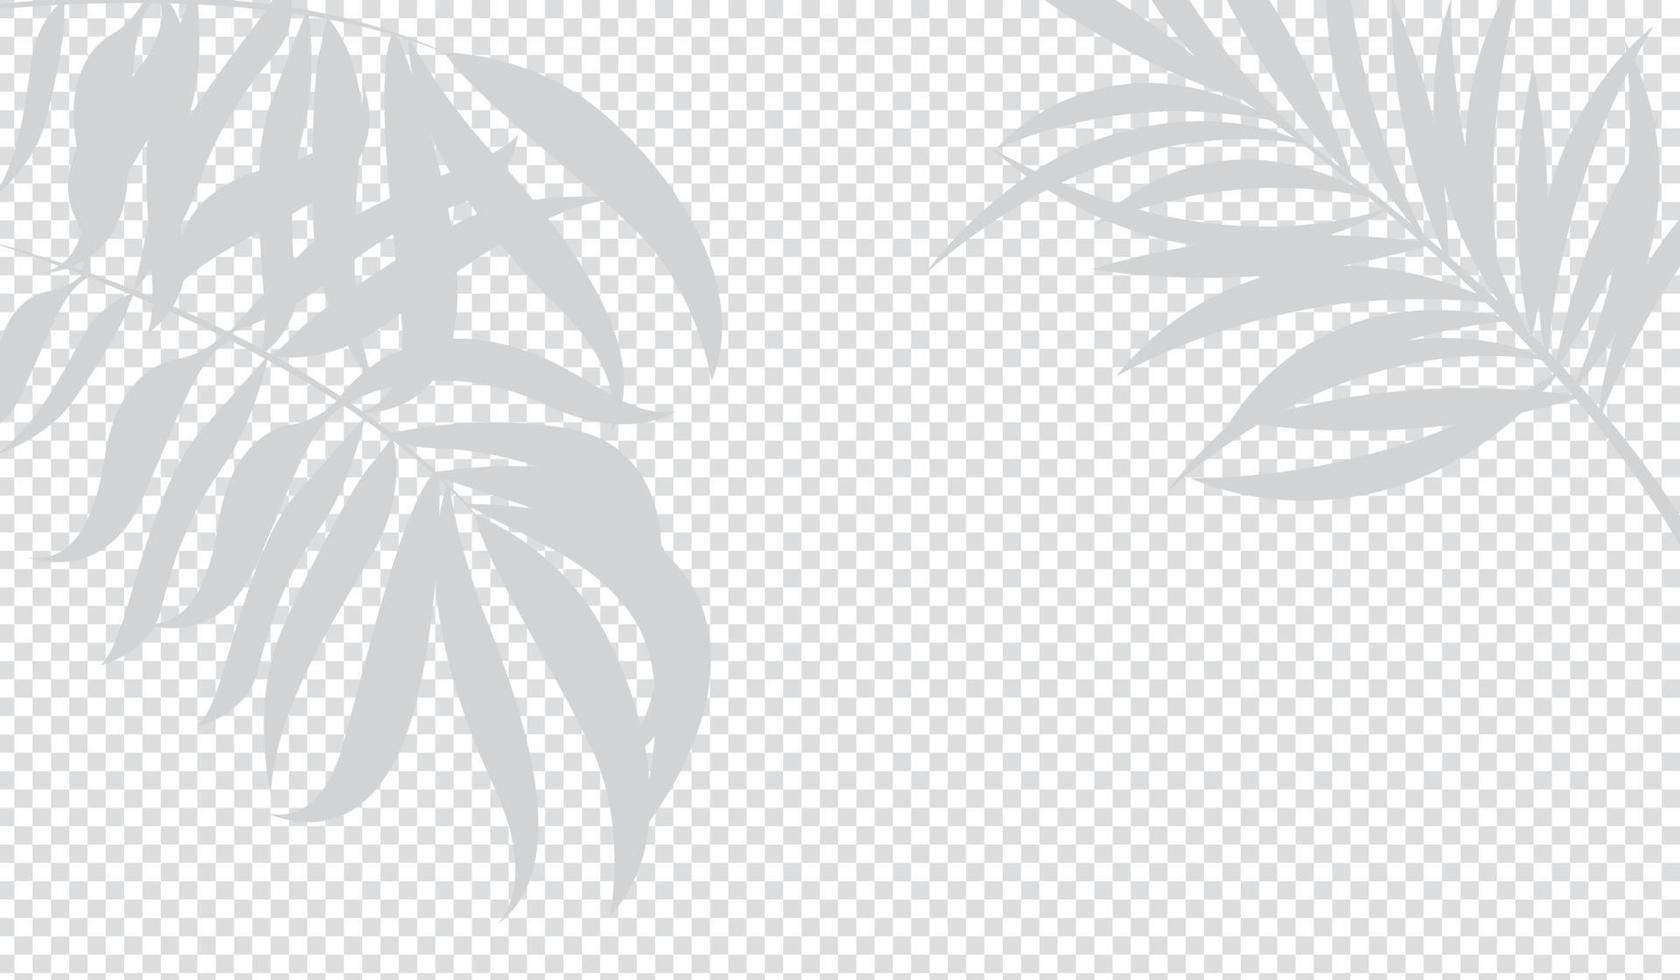 Transparent shadow effects. Vector with shadow overlays on transparent background. Vector transparent shadows of palm leaf, leaves